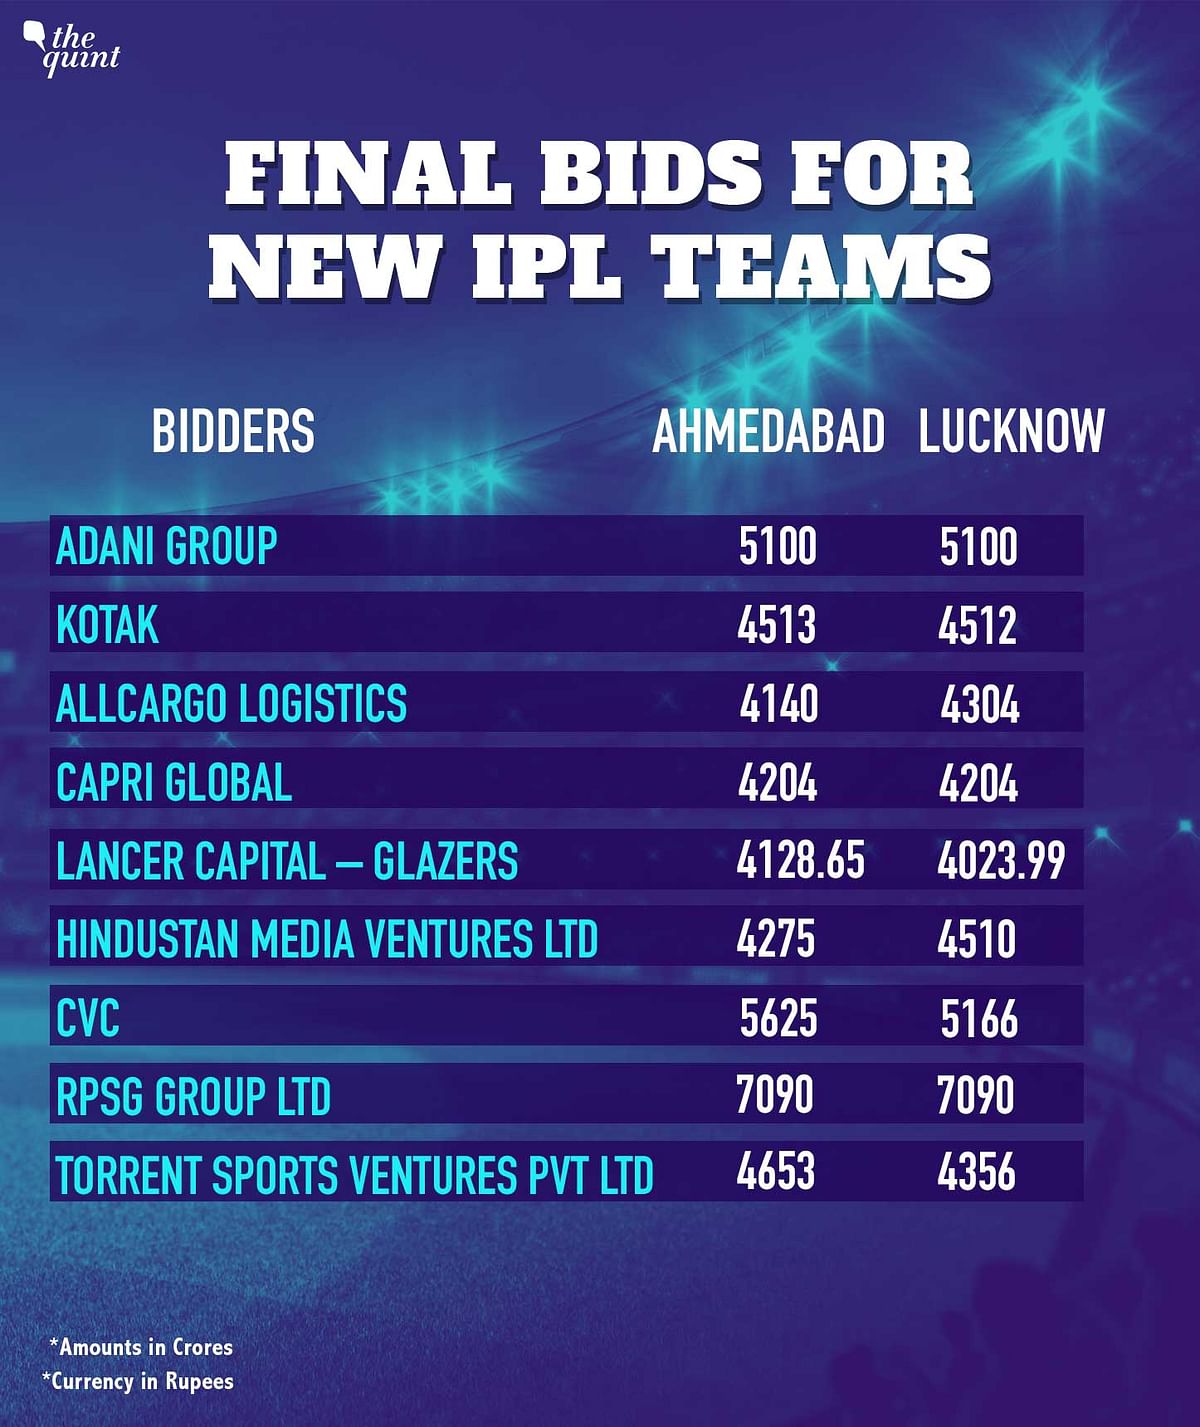 The two new teams in the IPL are from Ahmedabad and Lucknow.